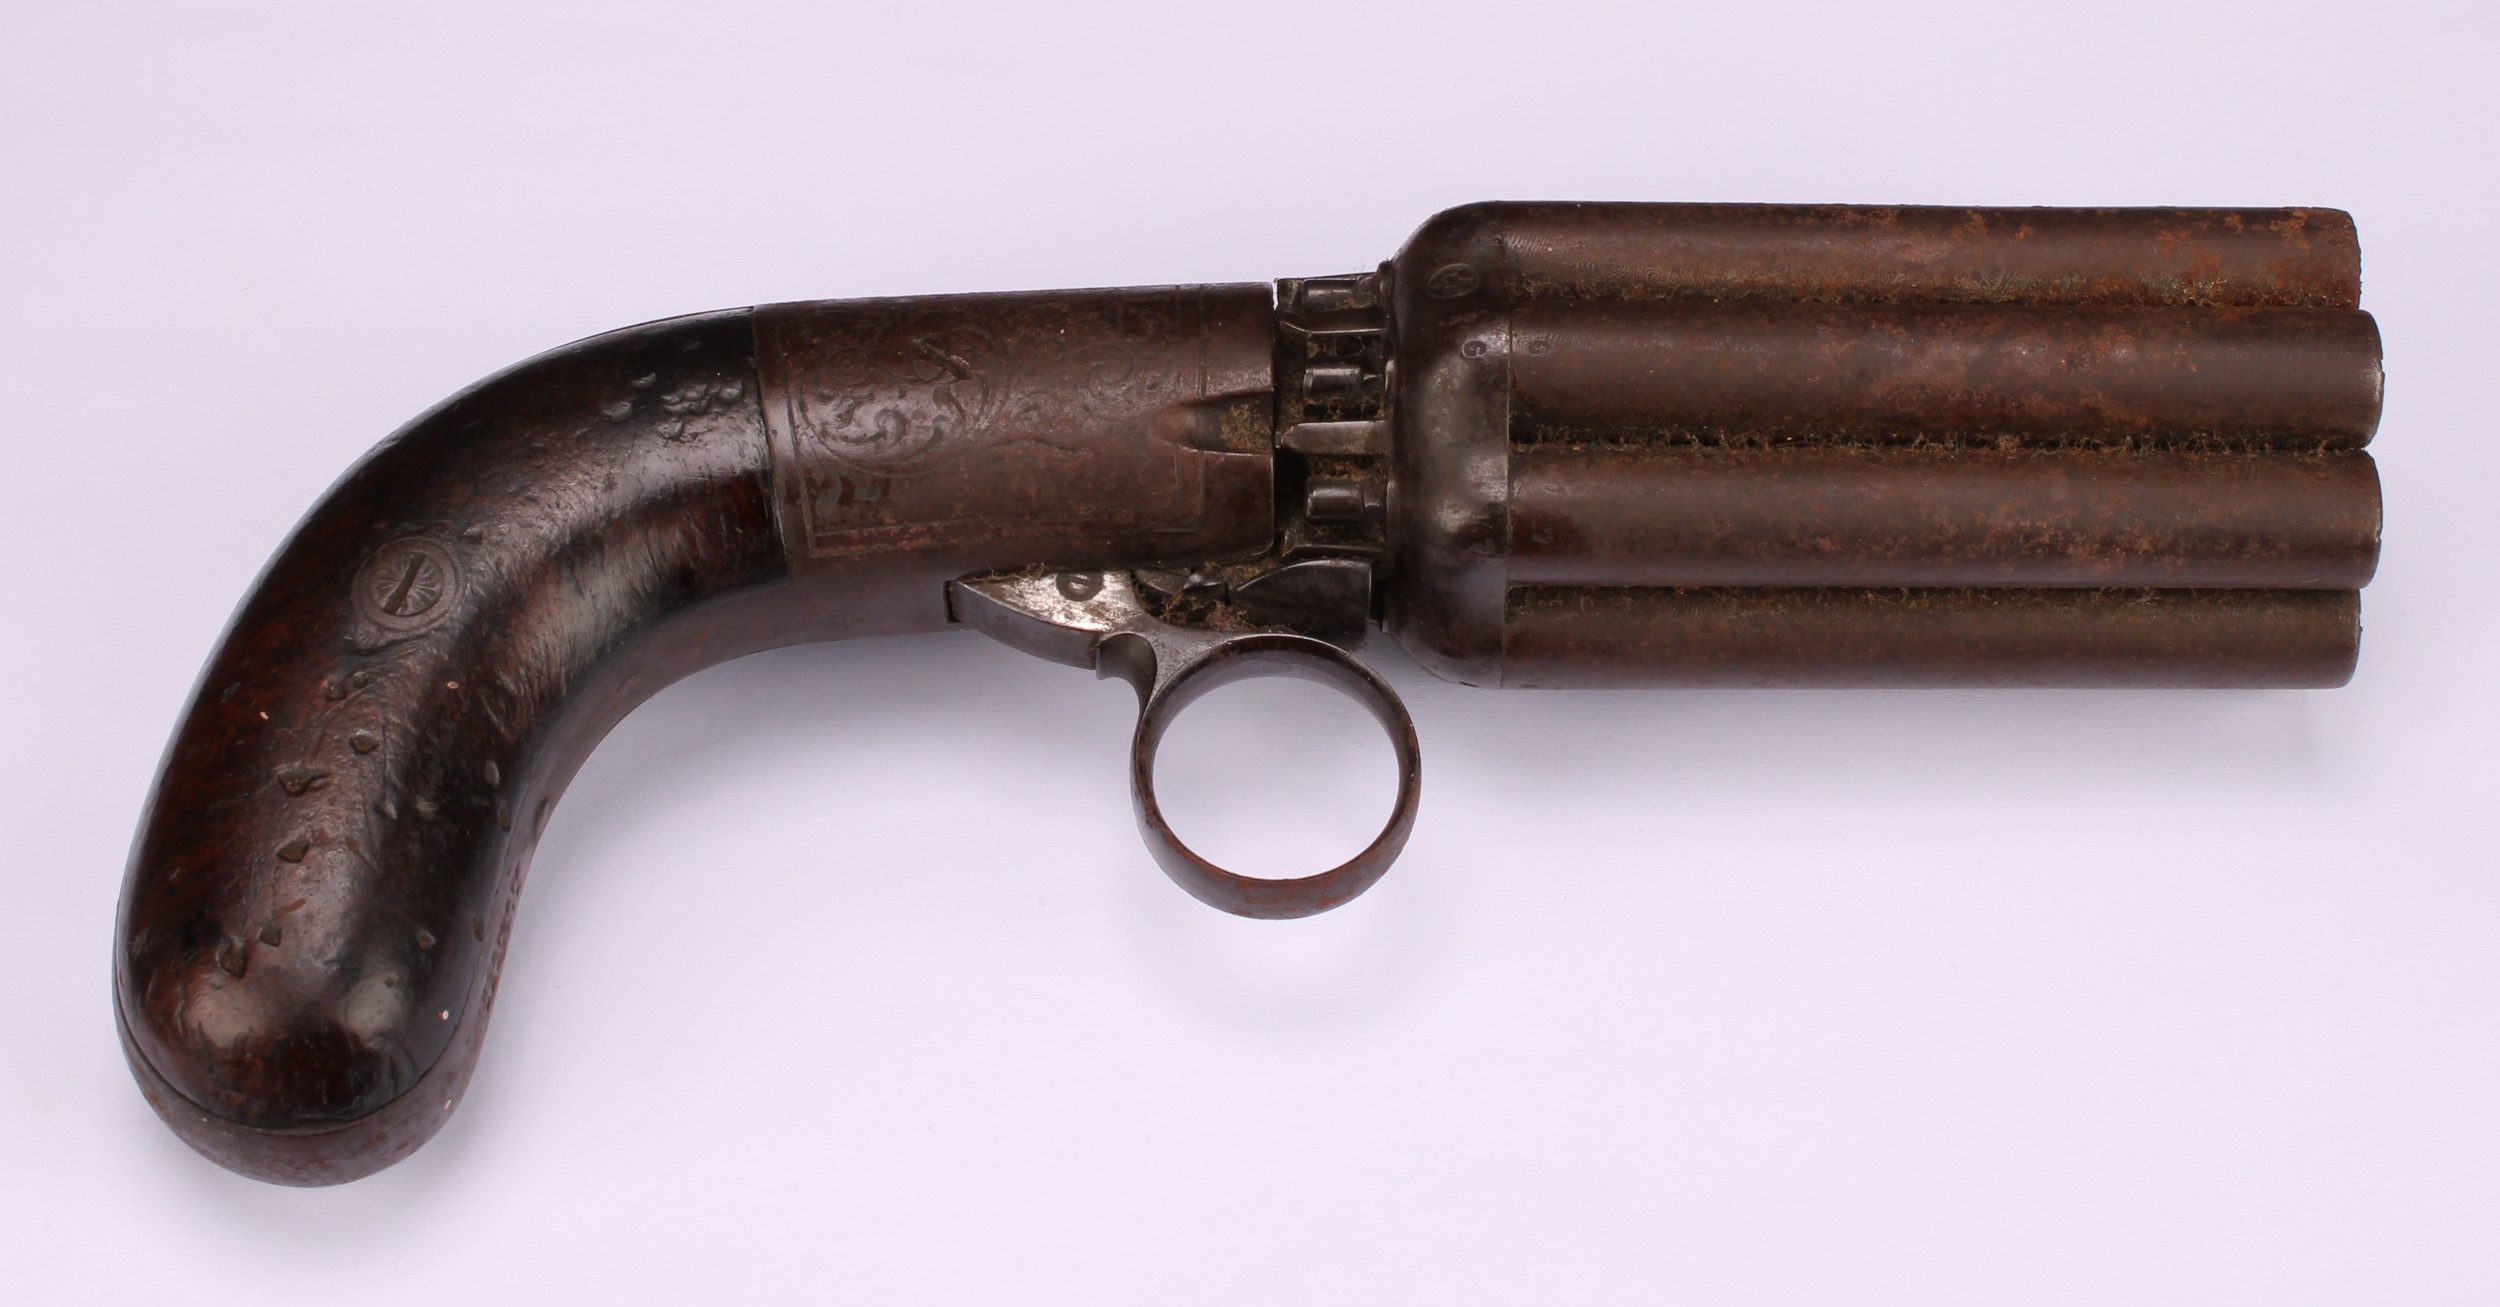 A 19th century eight-shot pepper-box revolver, 7.5cm barrel, engraved lock plate, two-piece grip, - Image 2 of 4